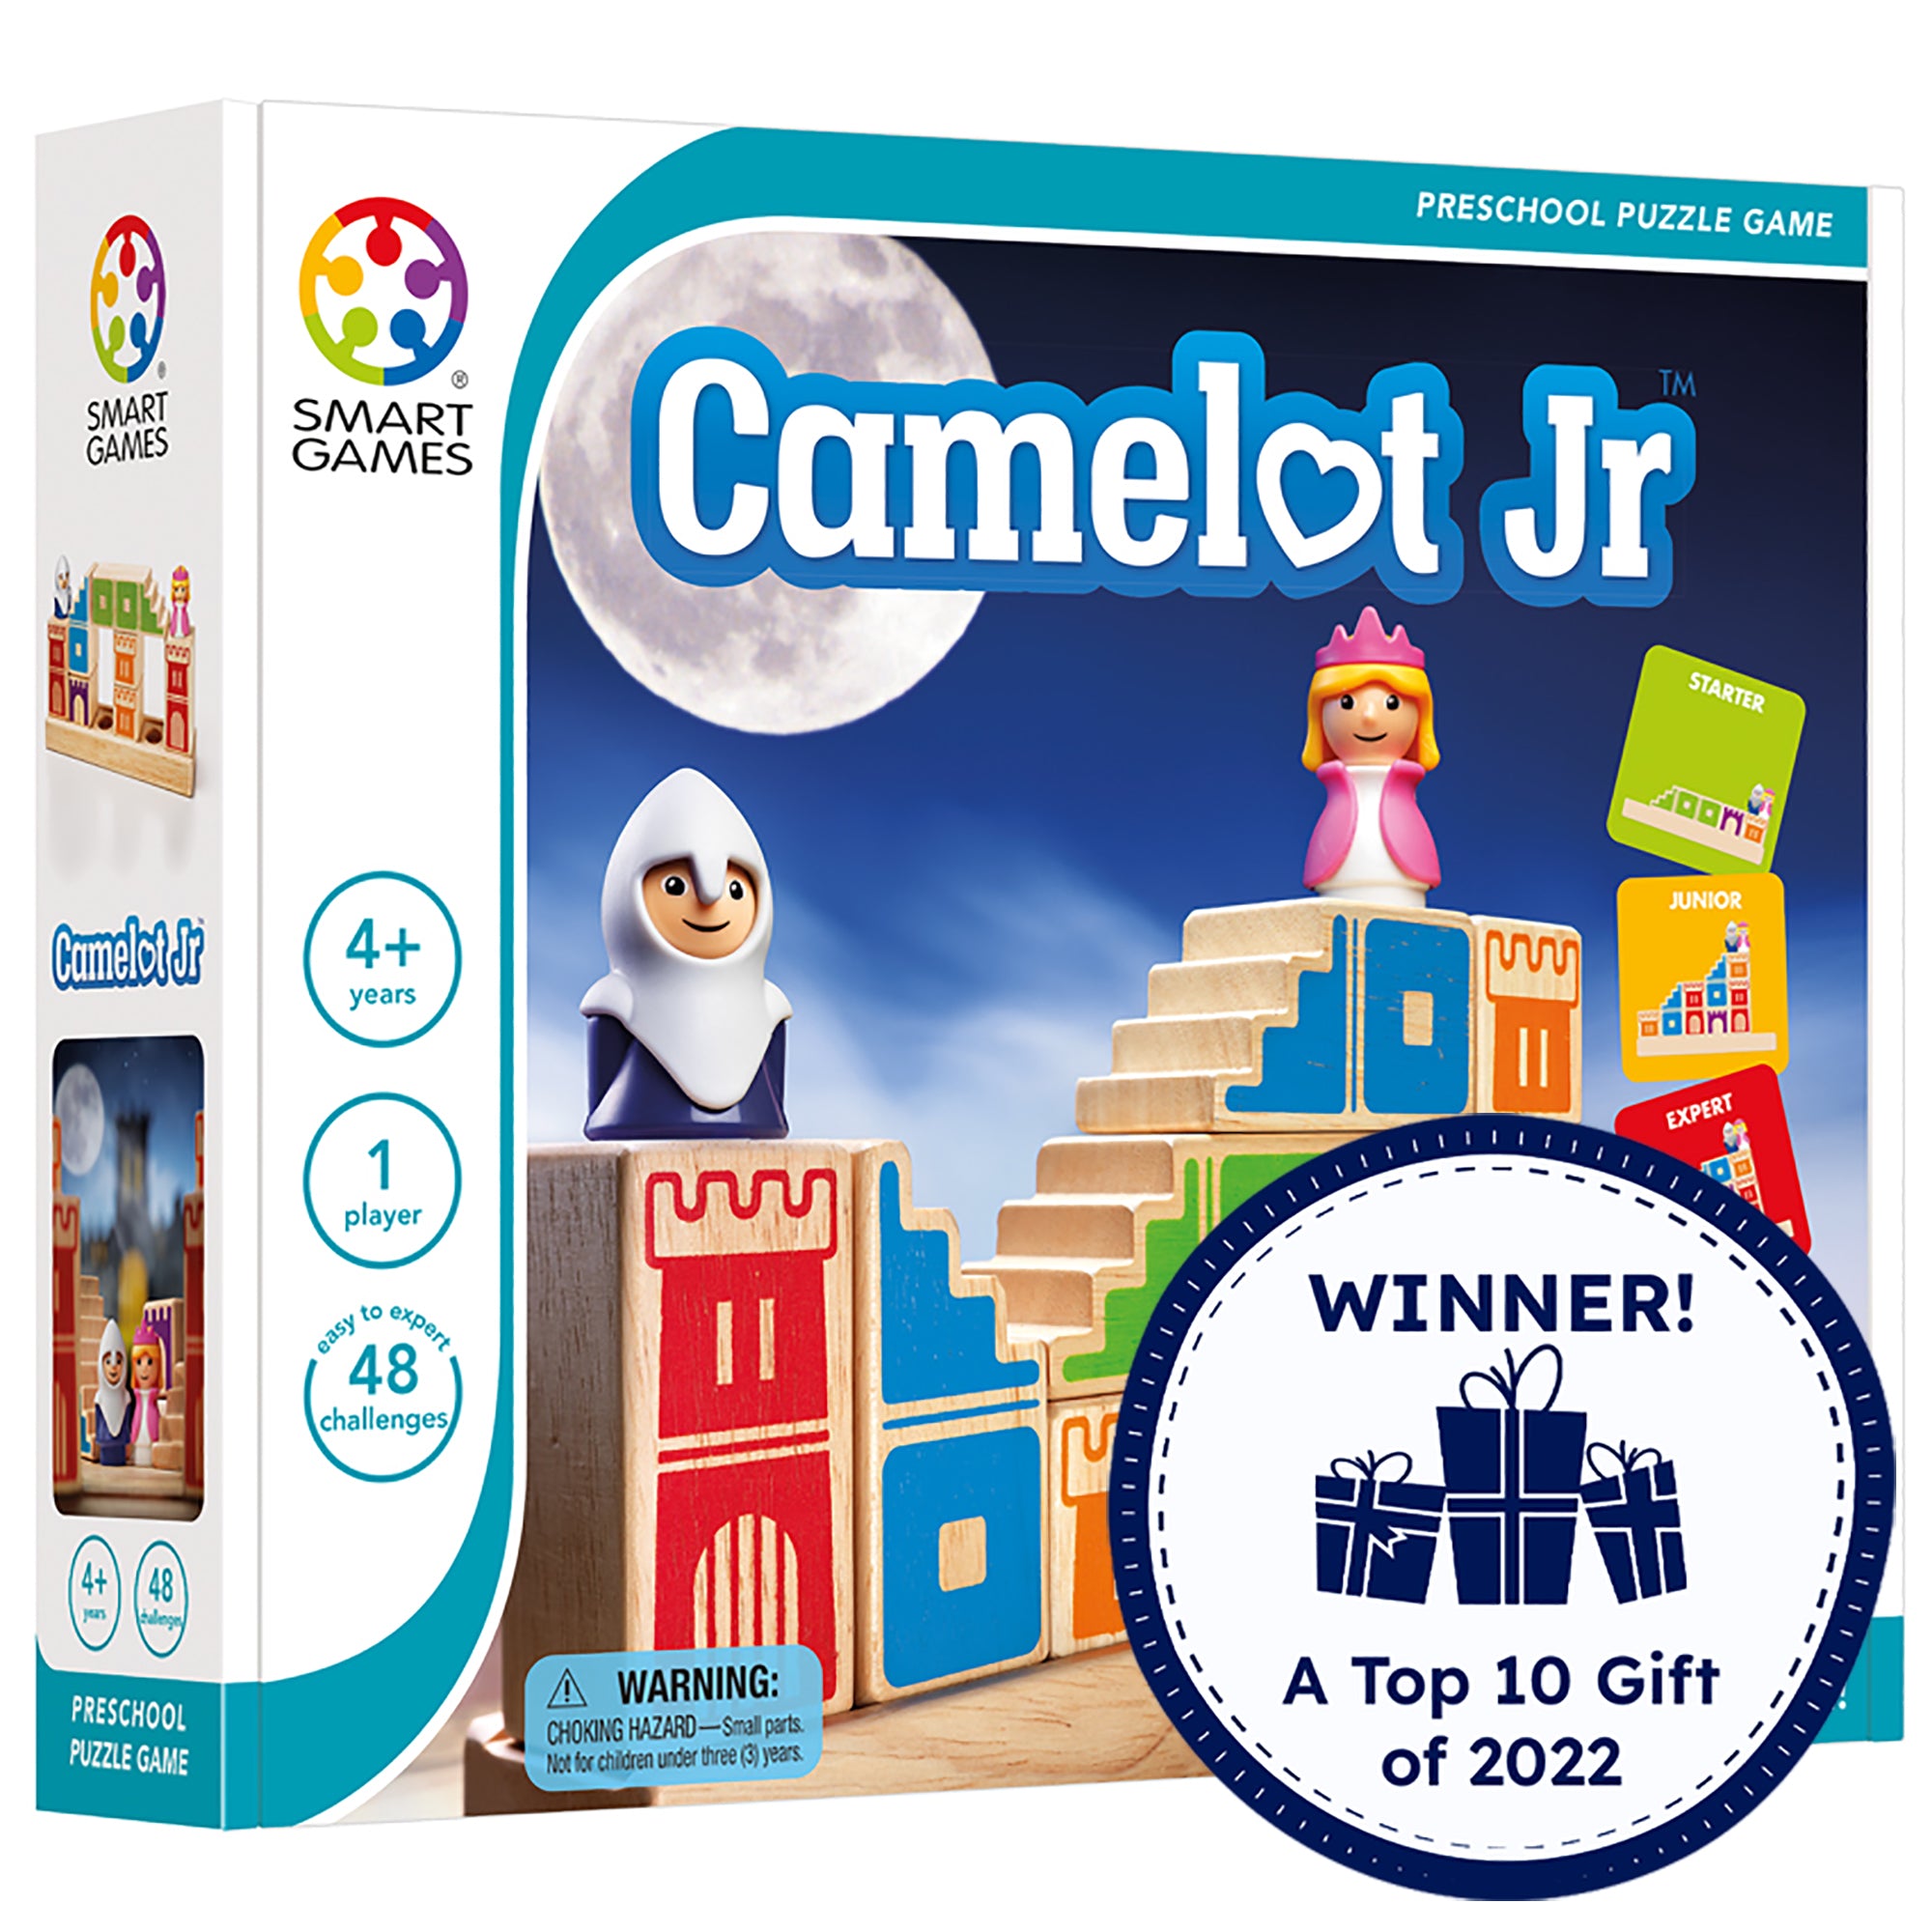 Camelot Junior game box. The box is standing, showing the cover. The main part of the cover shows the game in play with a knight piece and a princess piece standing on top of several wood block pieces with castle walls painted on them in different colors. You can see a few challenge cards on the right. The box indicates that it is a 1 player game for ages 4 and up. There are 48 challenges. There is a badge reading “Winner! A top 10 gift of 2022” in the bottom-right.